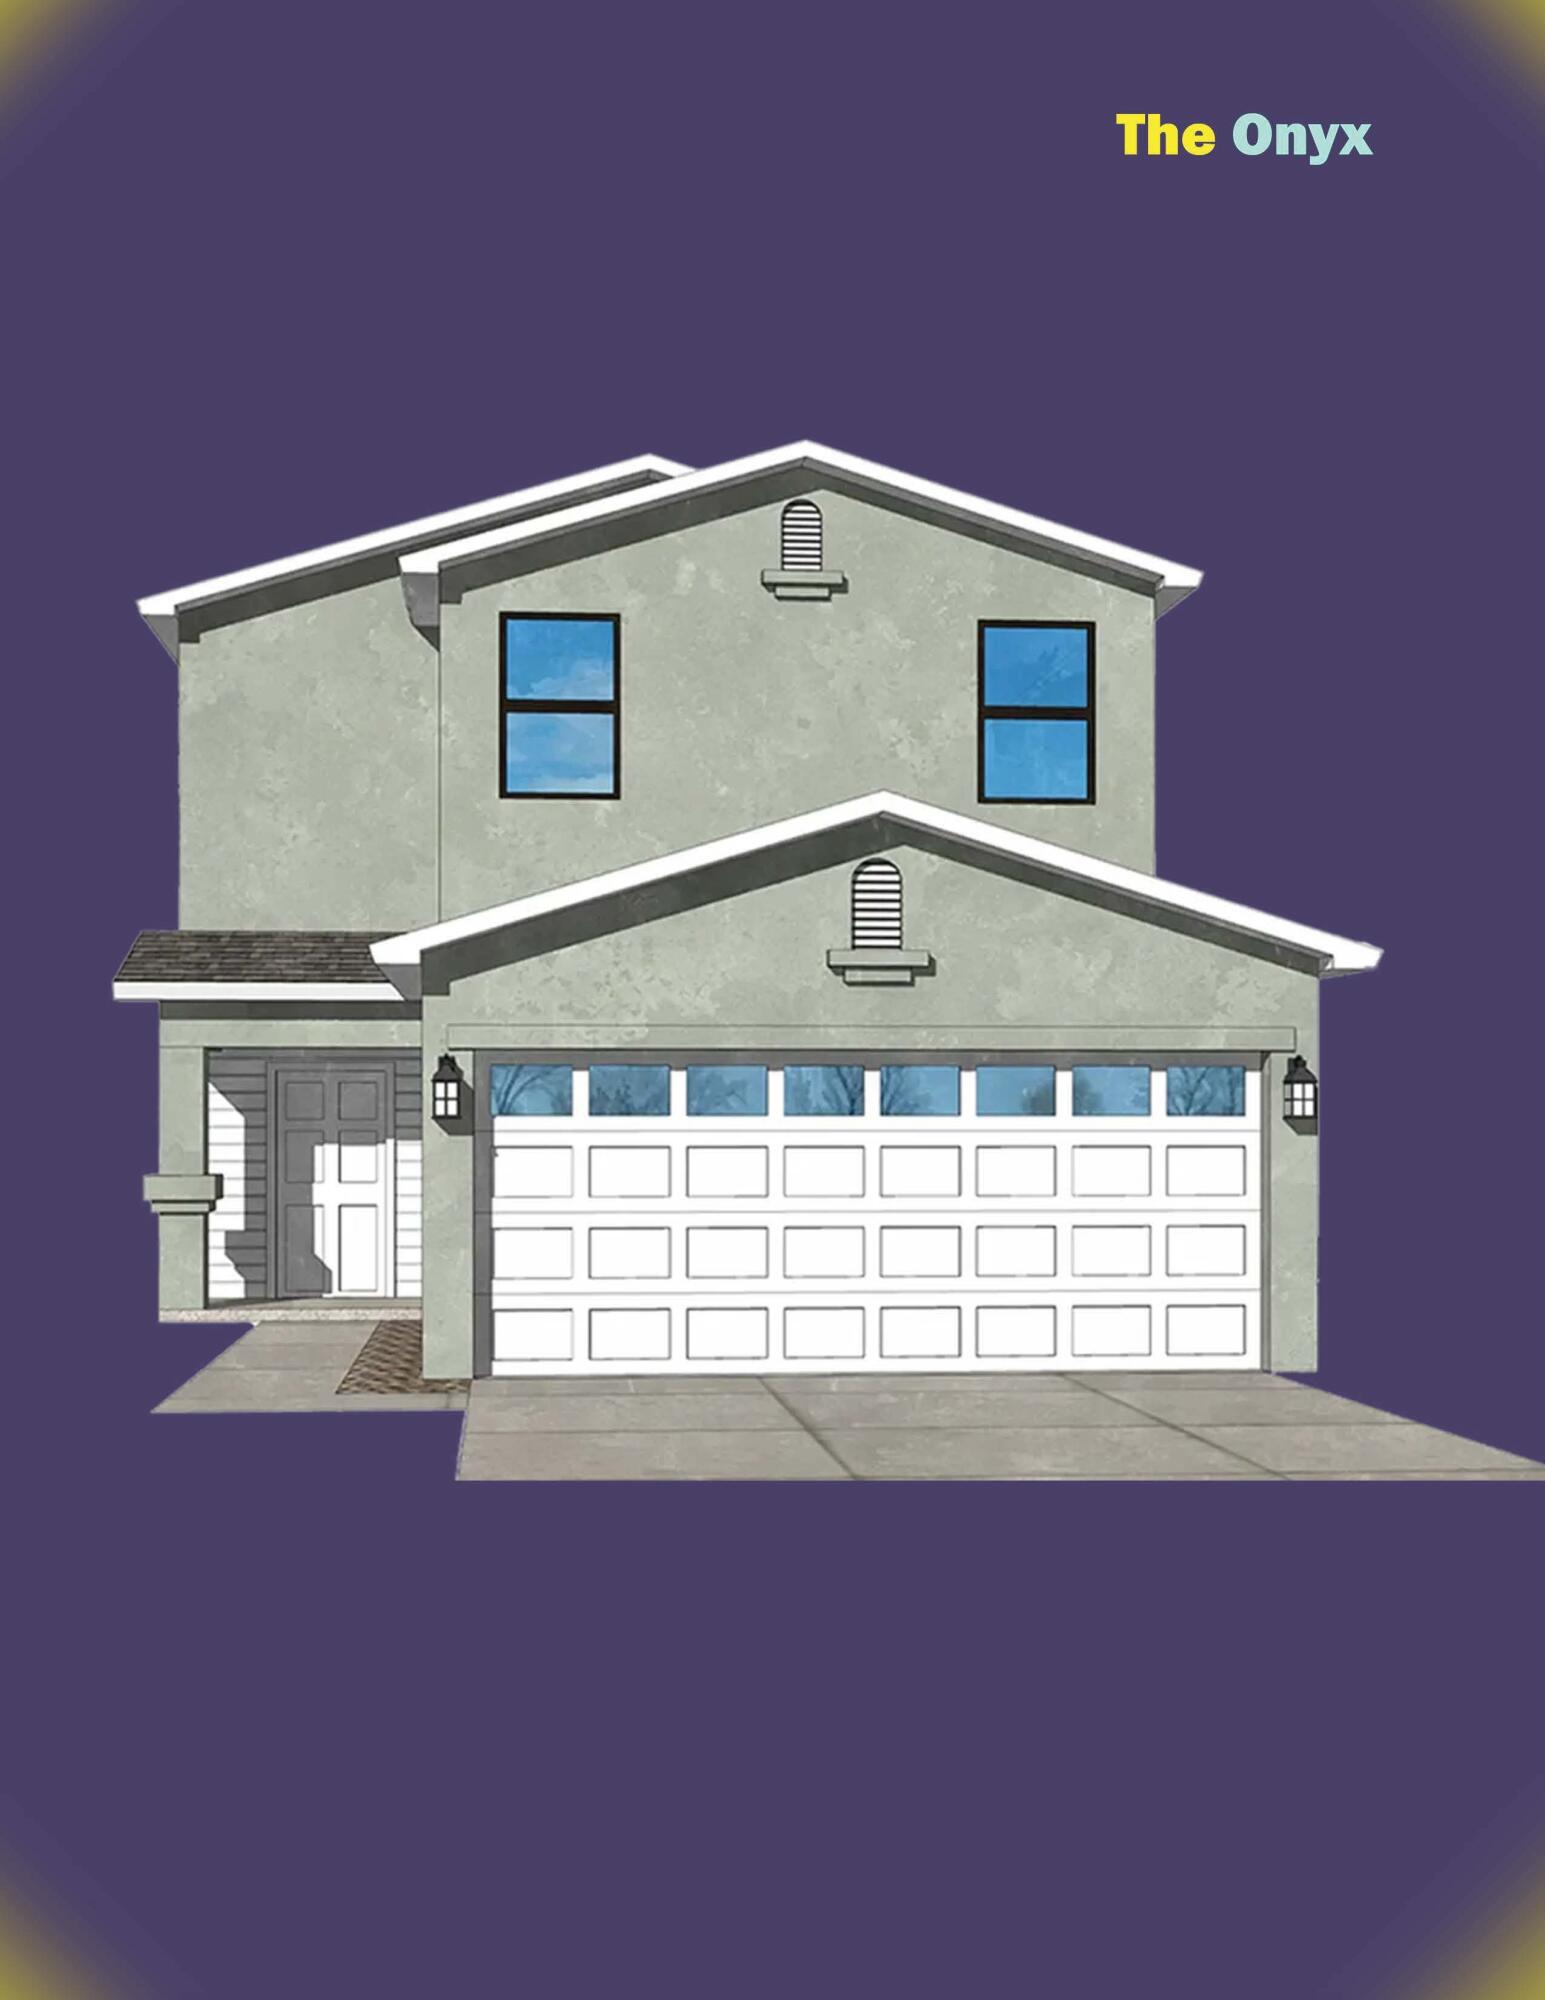 Pics are of model. Actual selections will vary. Two-story, 4 bdr (all up), 2 C garage, 2.5 baths, living, dining, kitchen, covered patio- move-in ready for June 2024. Located in the fast-growing community of Mountain Hawk, neighborhood has a park, and easy access to I-25 via 550 and Unser Blvd. Primary Bath has dual vanity sinks, shower, separate commode room. First floor has spacious living room, kitchen and dining area which opens to covered patio. Lg kitchen island. Enjoy all the counter space and many cabinets this plan offers. Award-wining builder, Twilight Homes, offers a one yer Builder warranty in addition to a 2-10 Structural Warranty. Come out and talk with Lana about all the features this well-priced home has to offer. You'll be impr